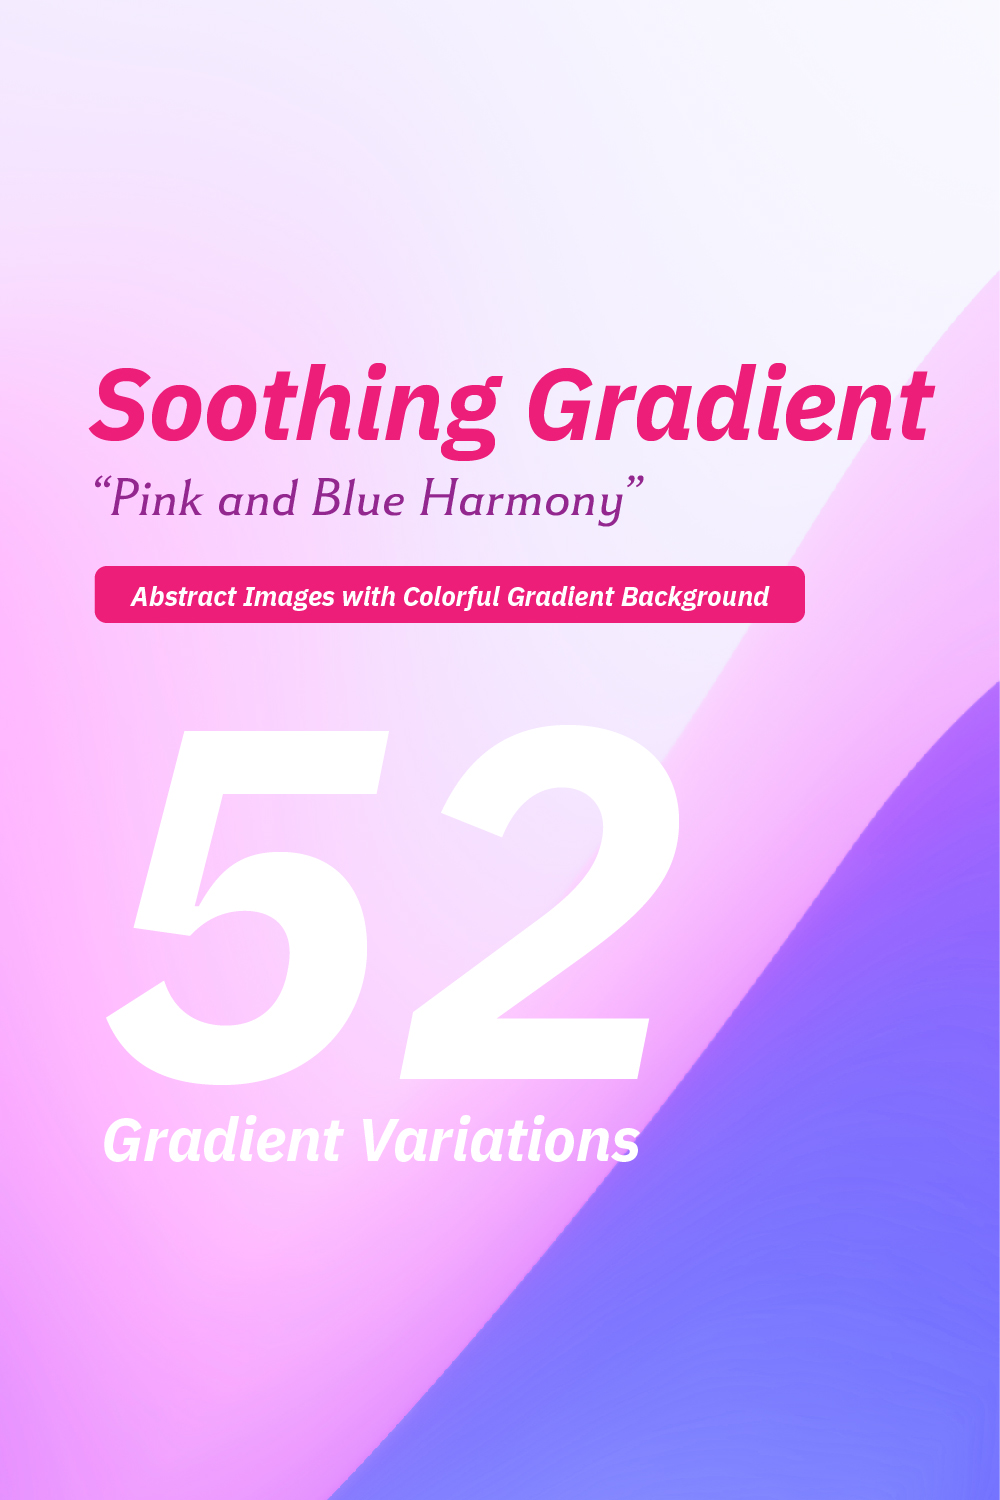 Soothing Gradient | Gradient Color - abstract images with colorful gradient backgrounds pinterest preview image.